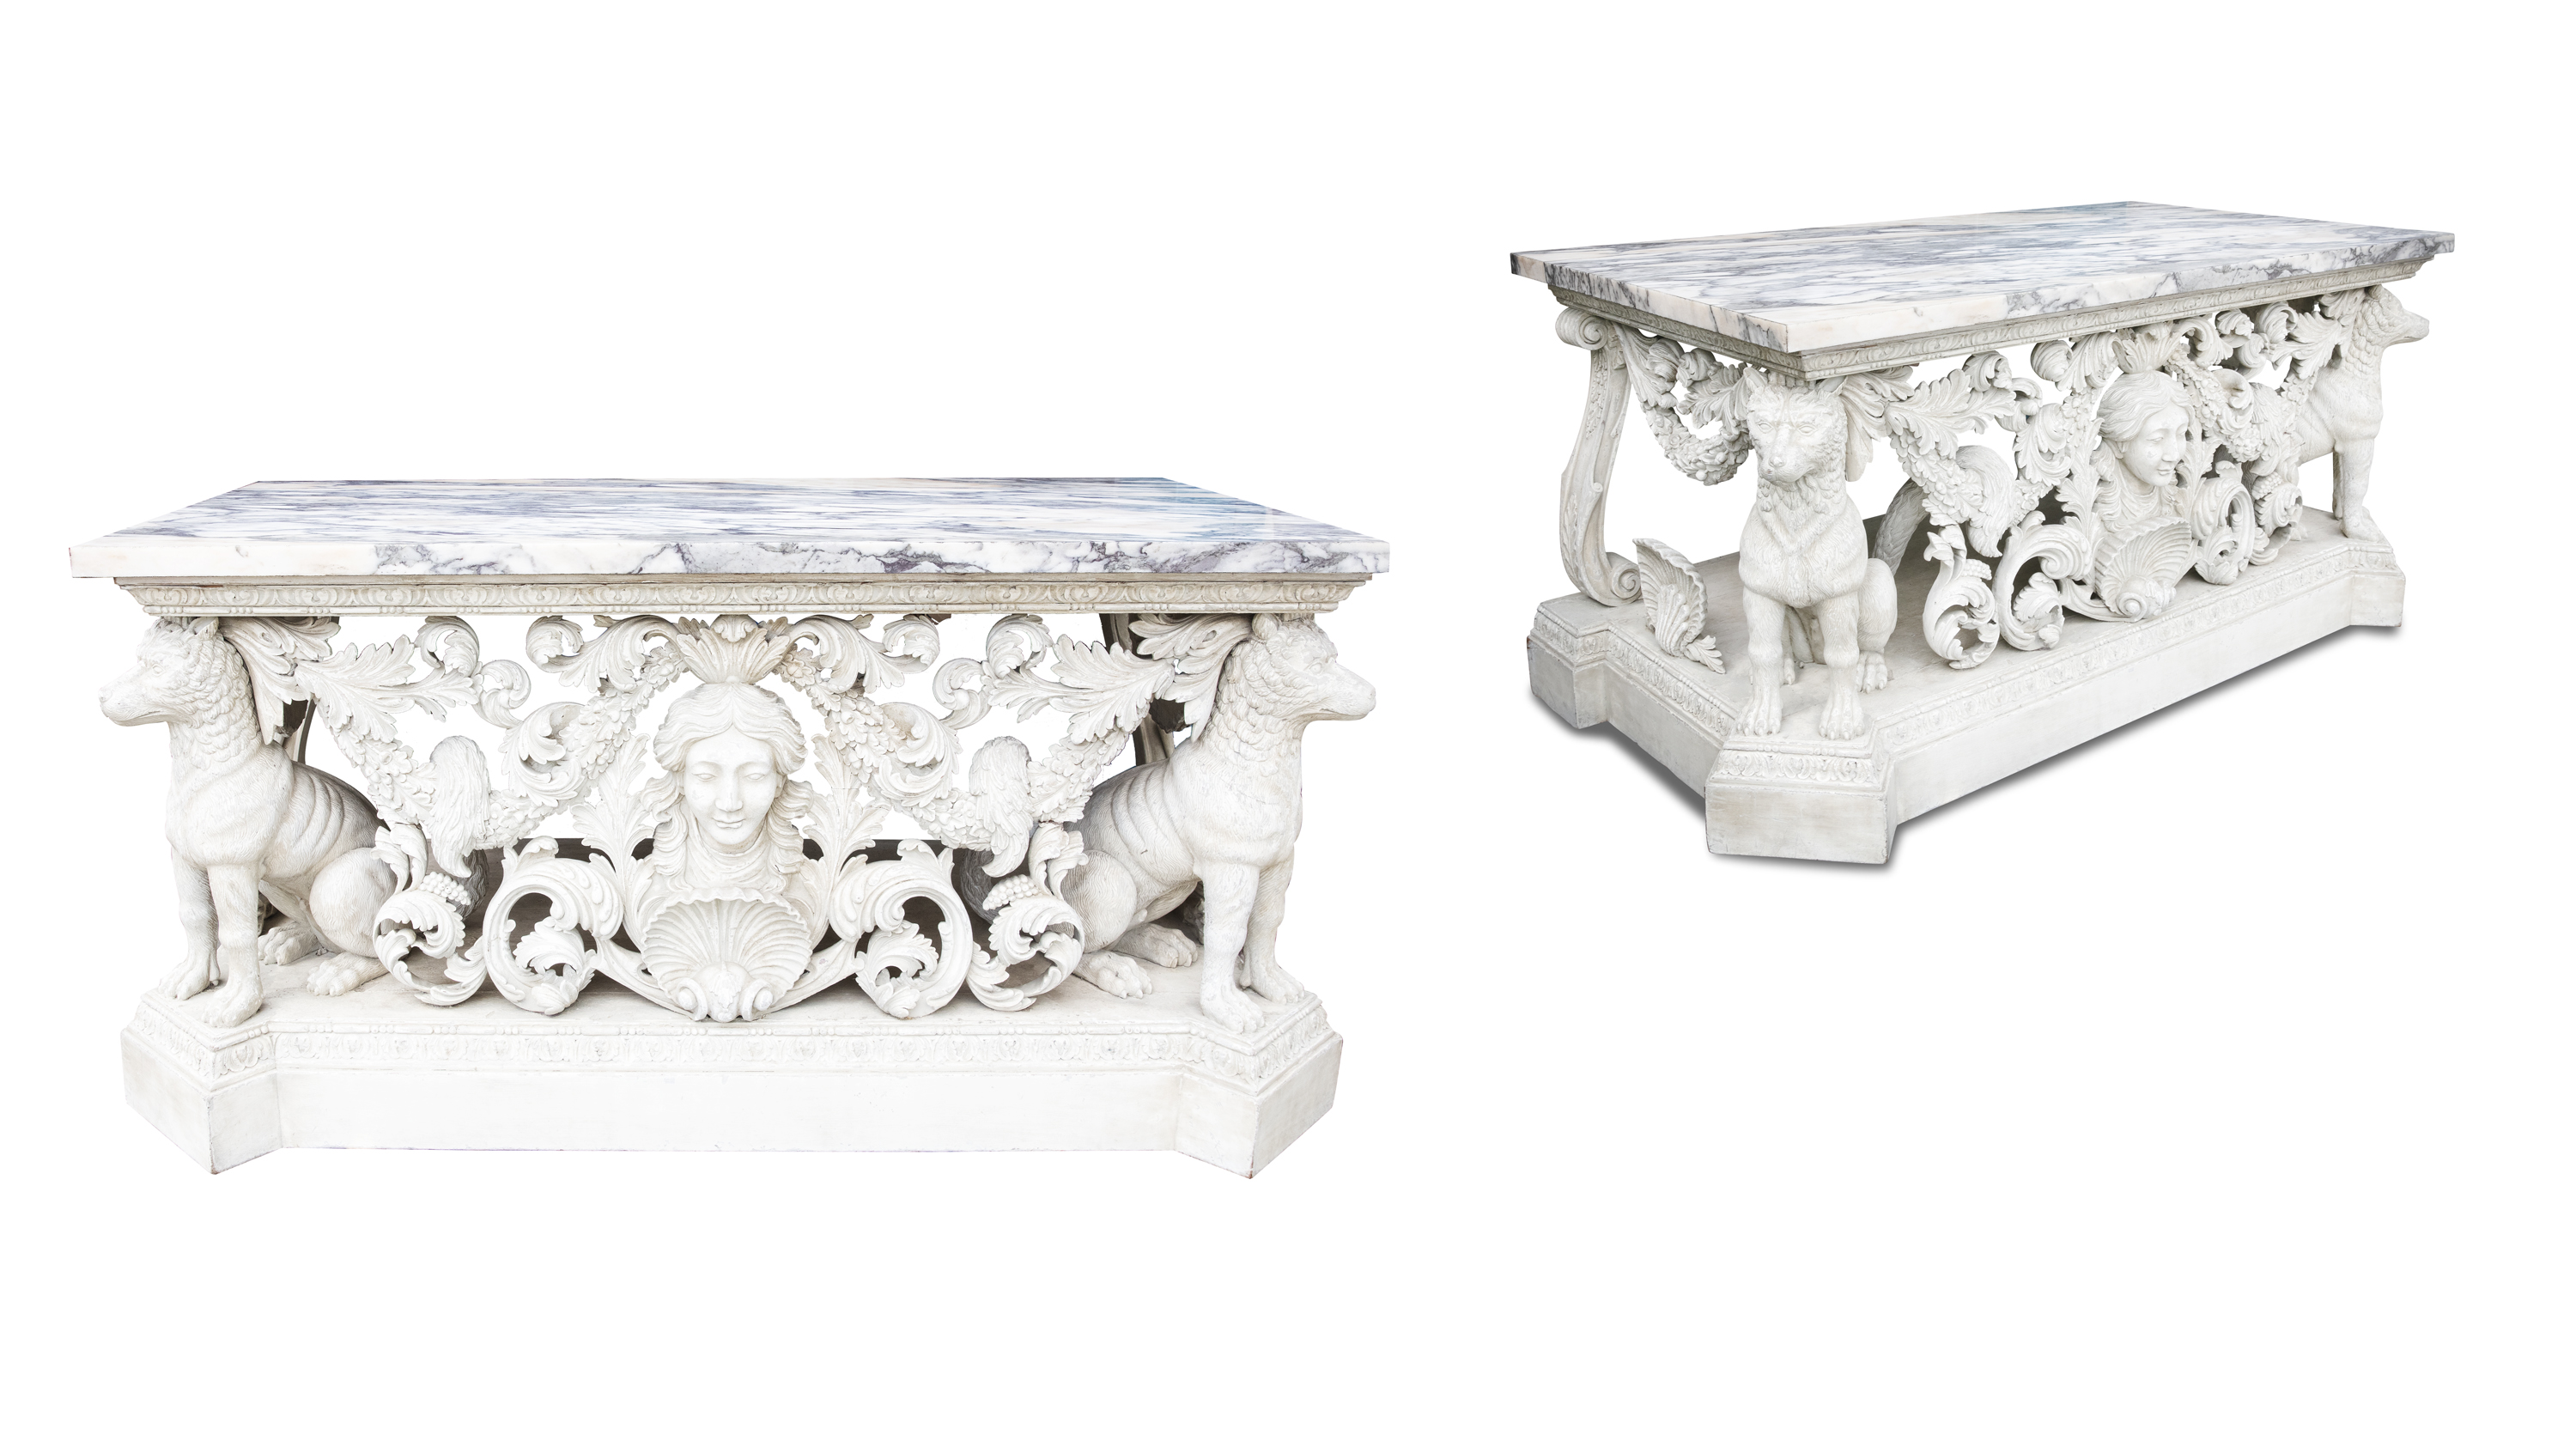 AN IMPRESSIVE PAIR OF GEORGE II STYLE CARVED PAINTED SIDE TABLES (20TH CENTURY), based on the - Image 3 of 7